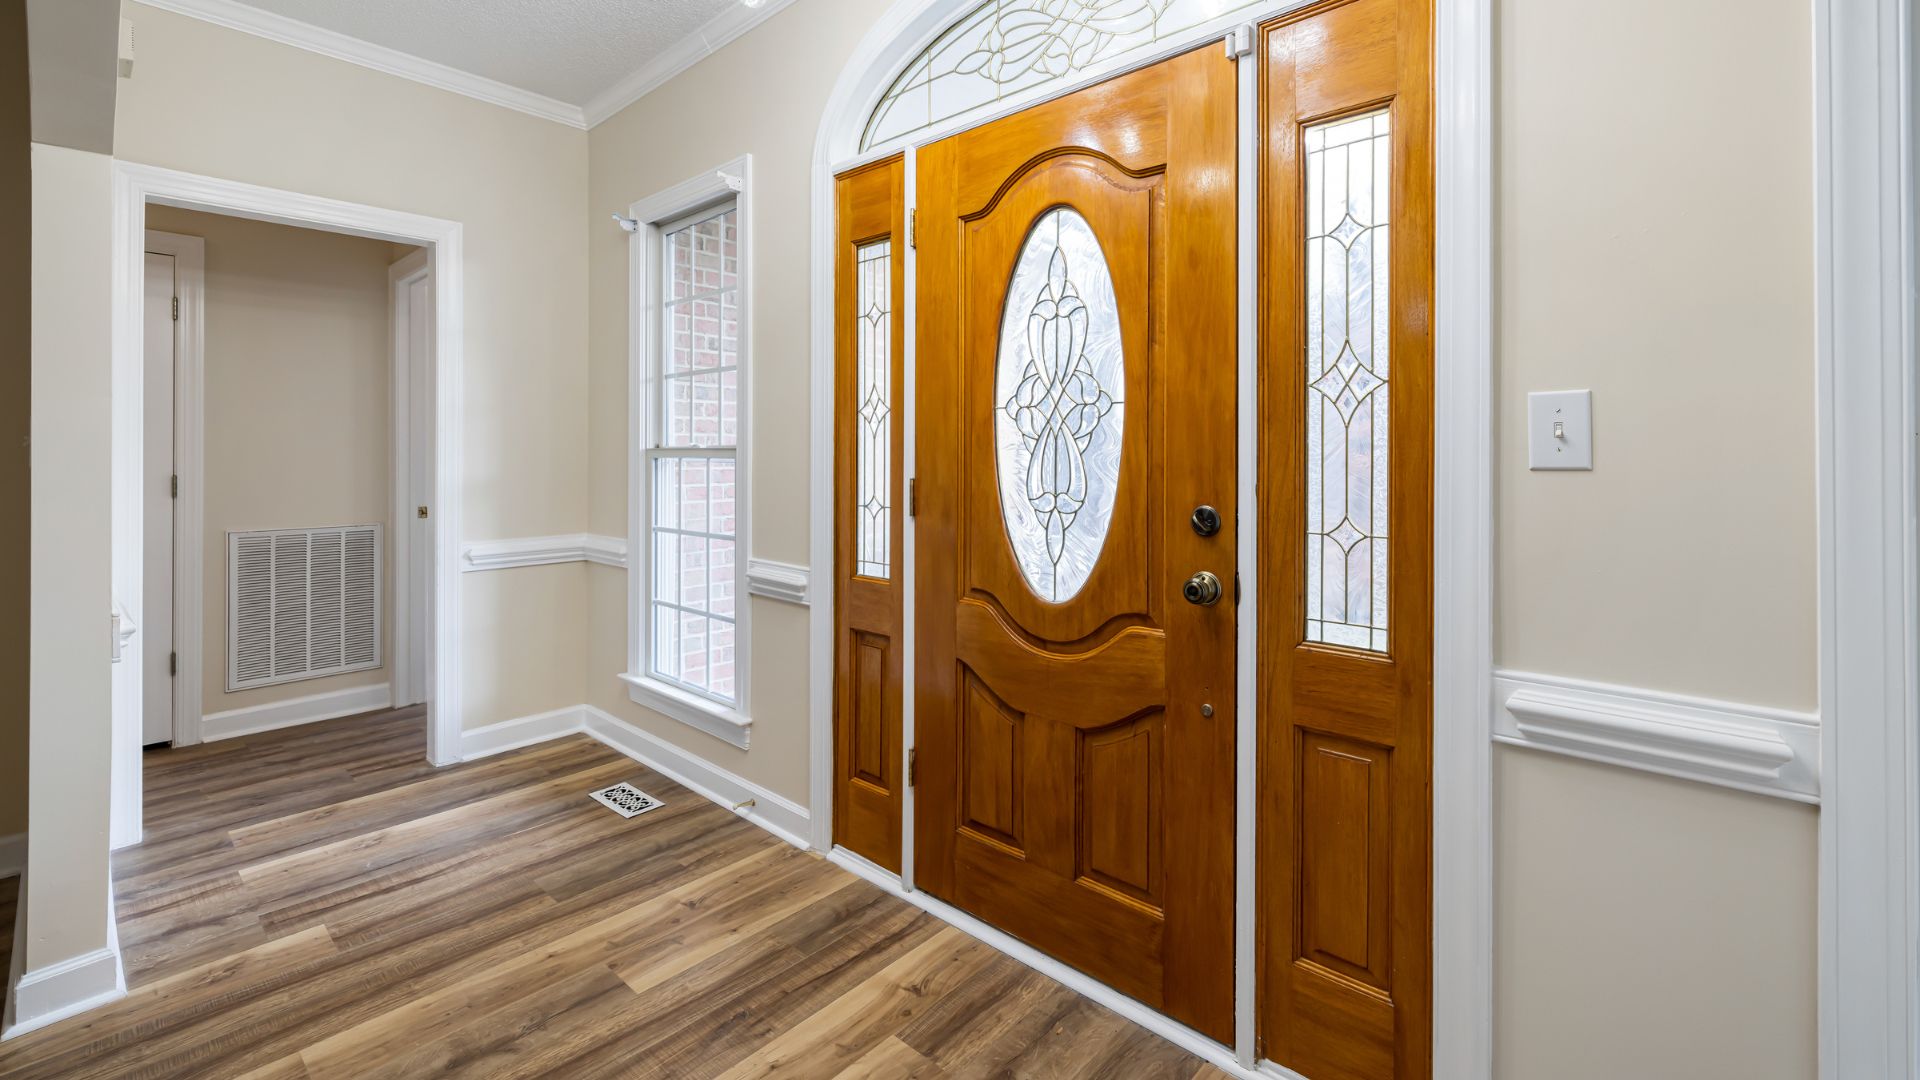 Interior view of a wooden front door with glass accent window